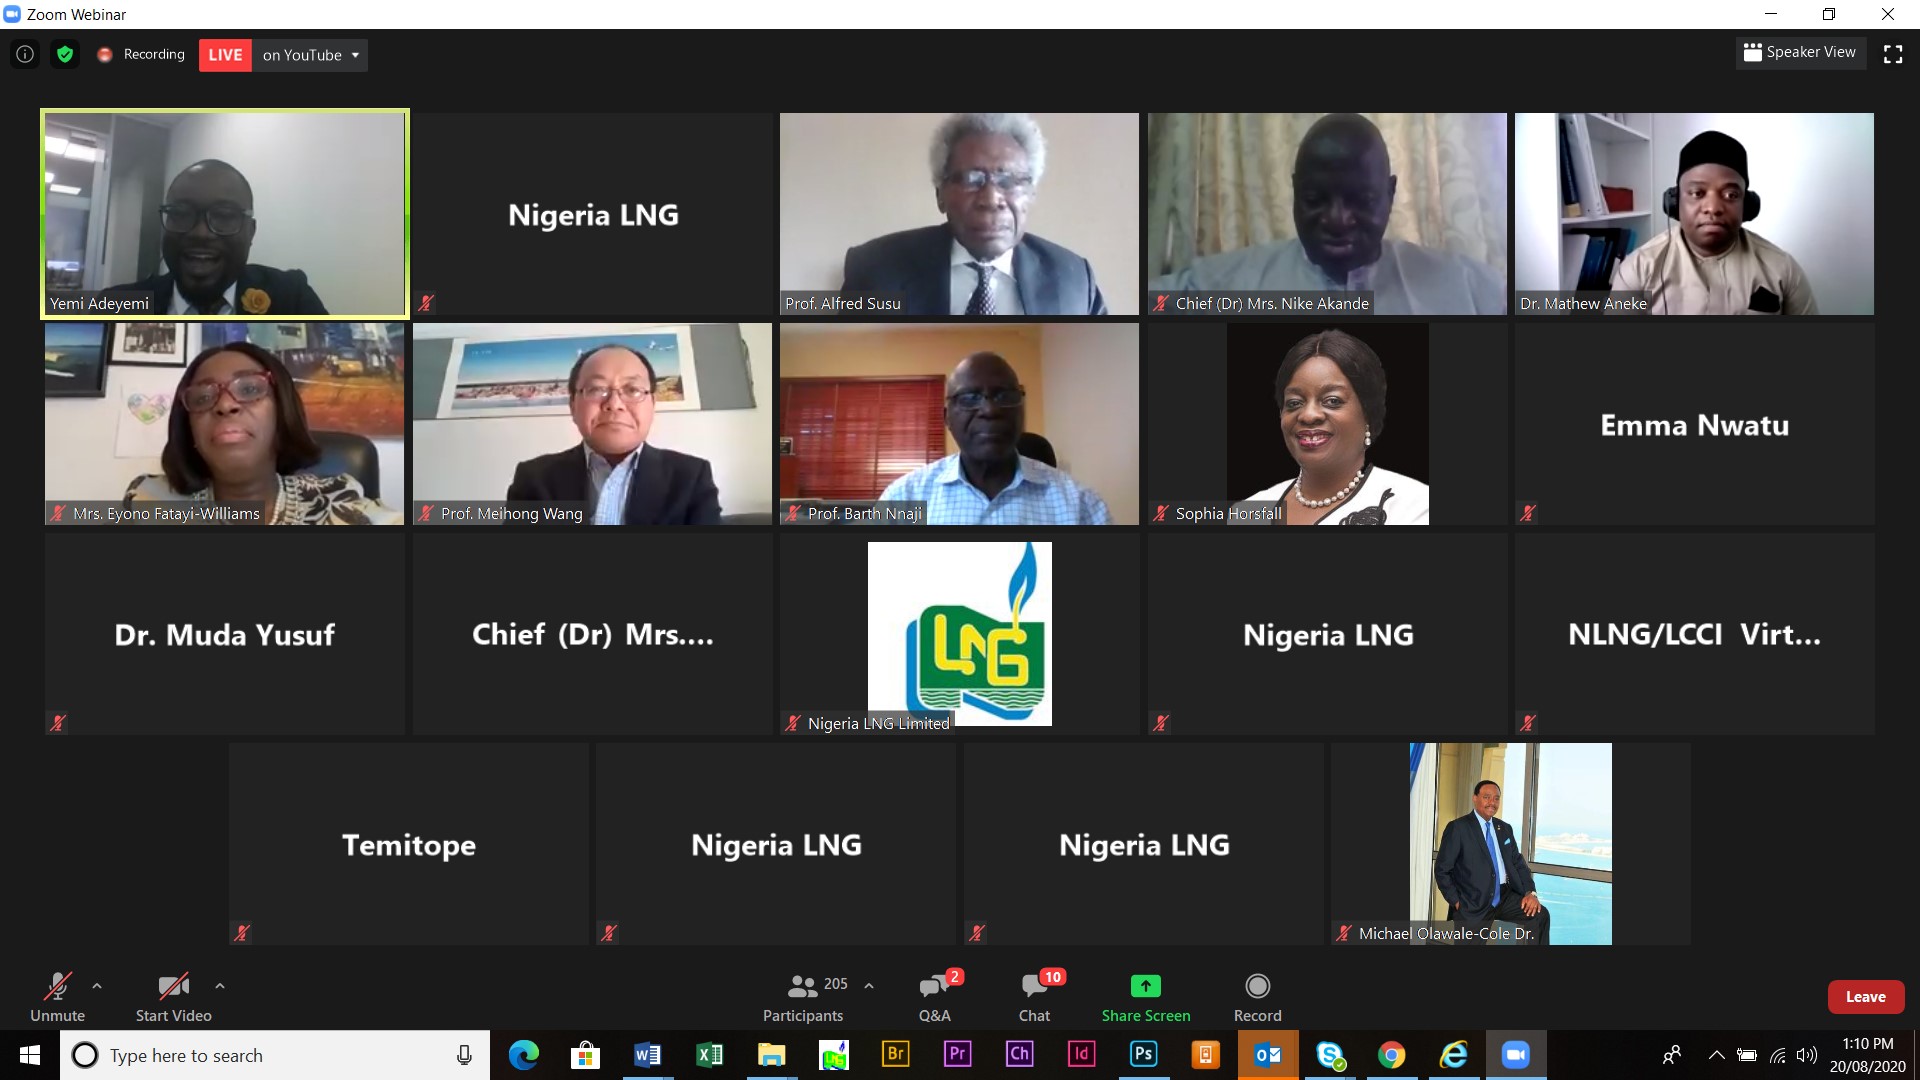 A webinar presentation of the winning work of NLNG-sponsored The Nigeria Prize for Science for 2019 at the annual NLNG-LCCI Business Interactive Forum. The winners, Professor Meihong Wang and Dr Mathew Aneke, presented their work on Carbon Capture, Carbon Utilization, Biomass Gasification and Energy Storage for Power Generation.